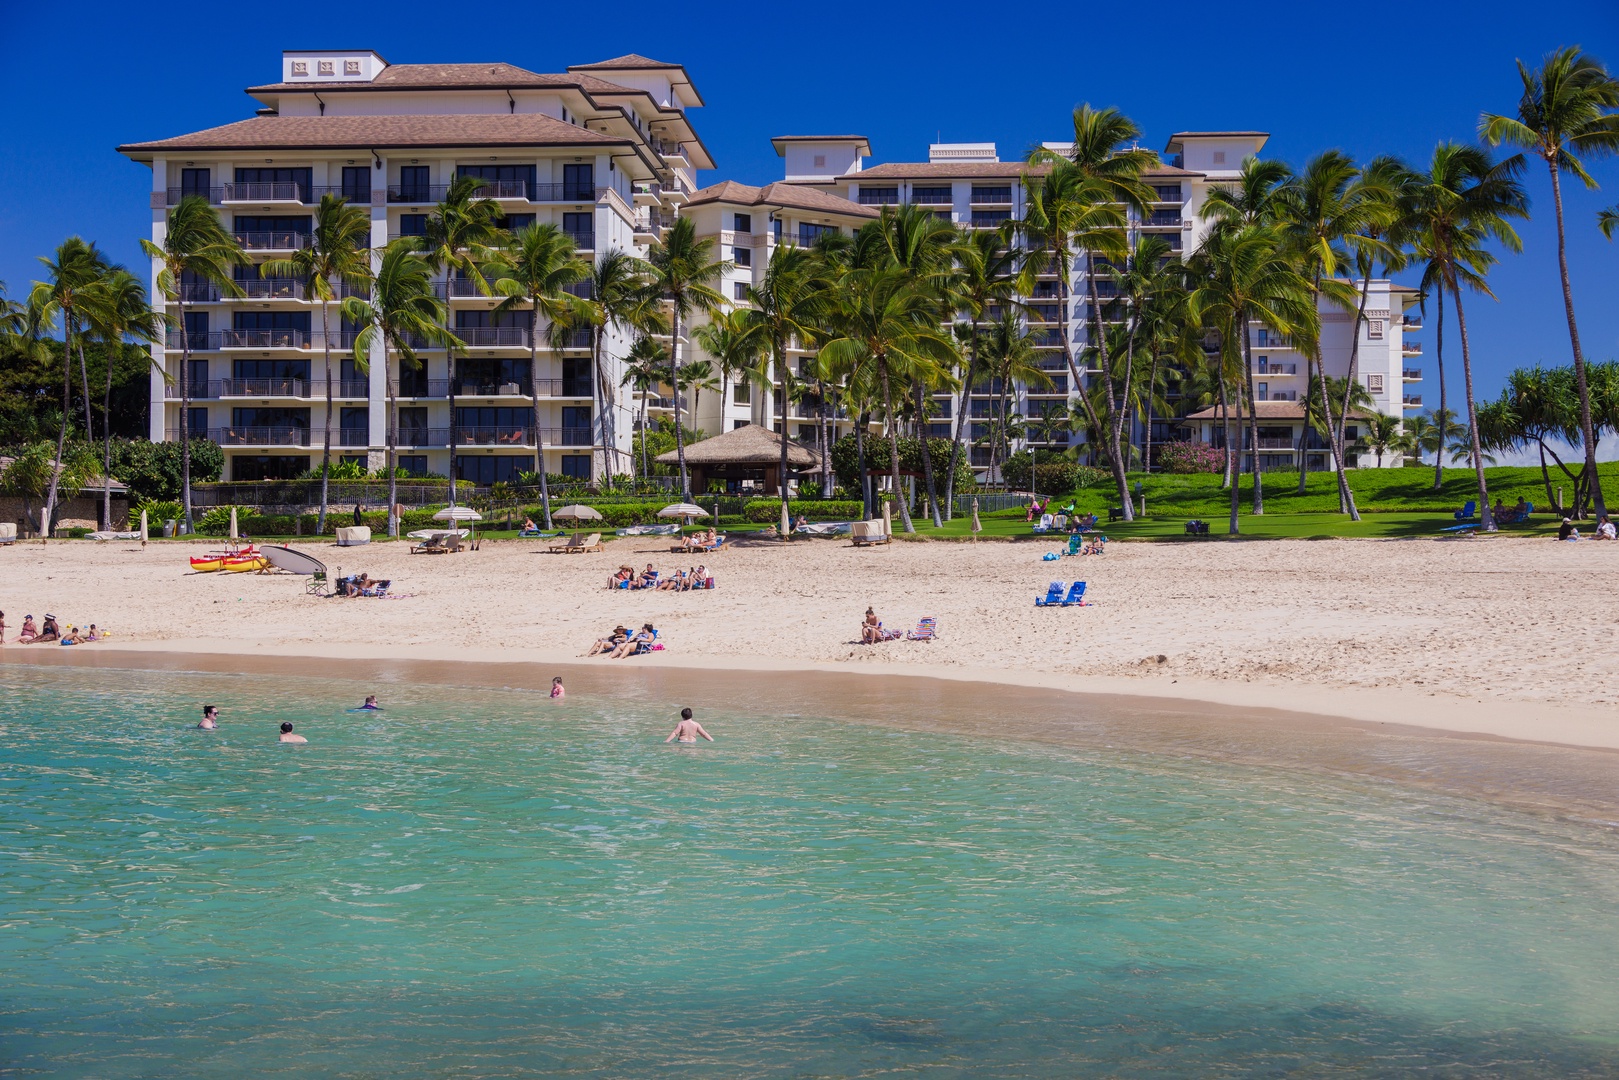 Kapolei Vacation Rentals, Ko Olina Kai 1057B - Ko Olina's private lagoons with soft sands and crystal blue water, perfect for afternoon swim or spectacular views.